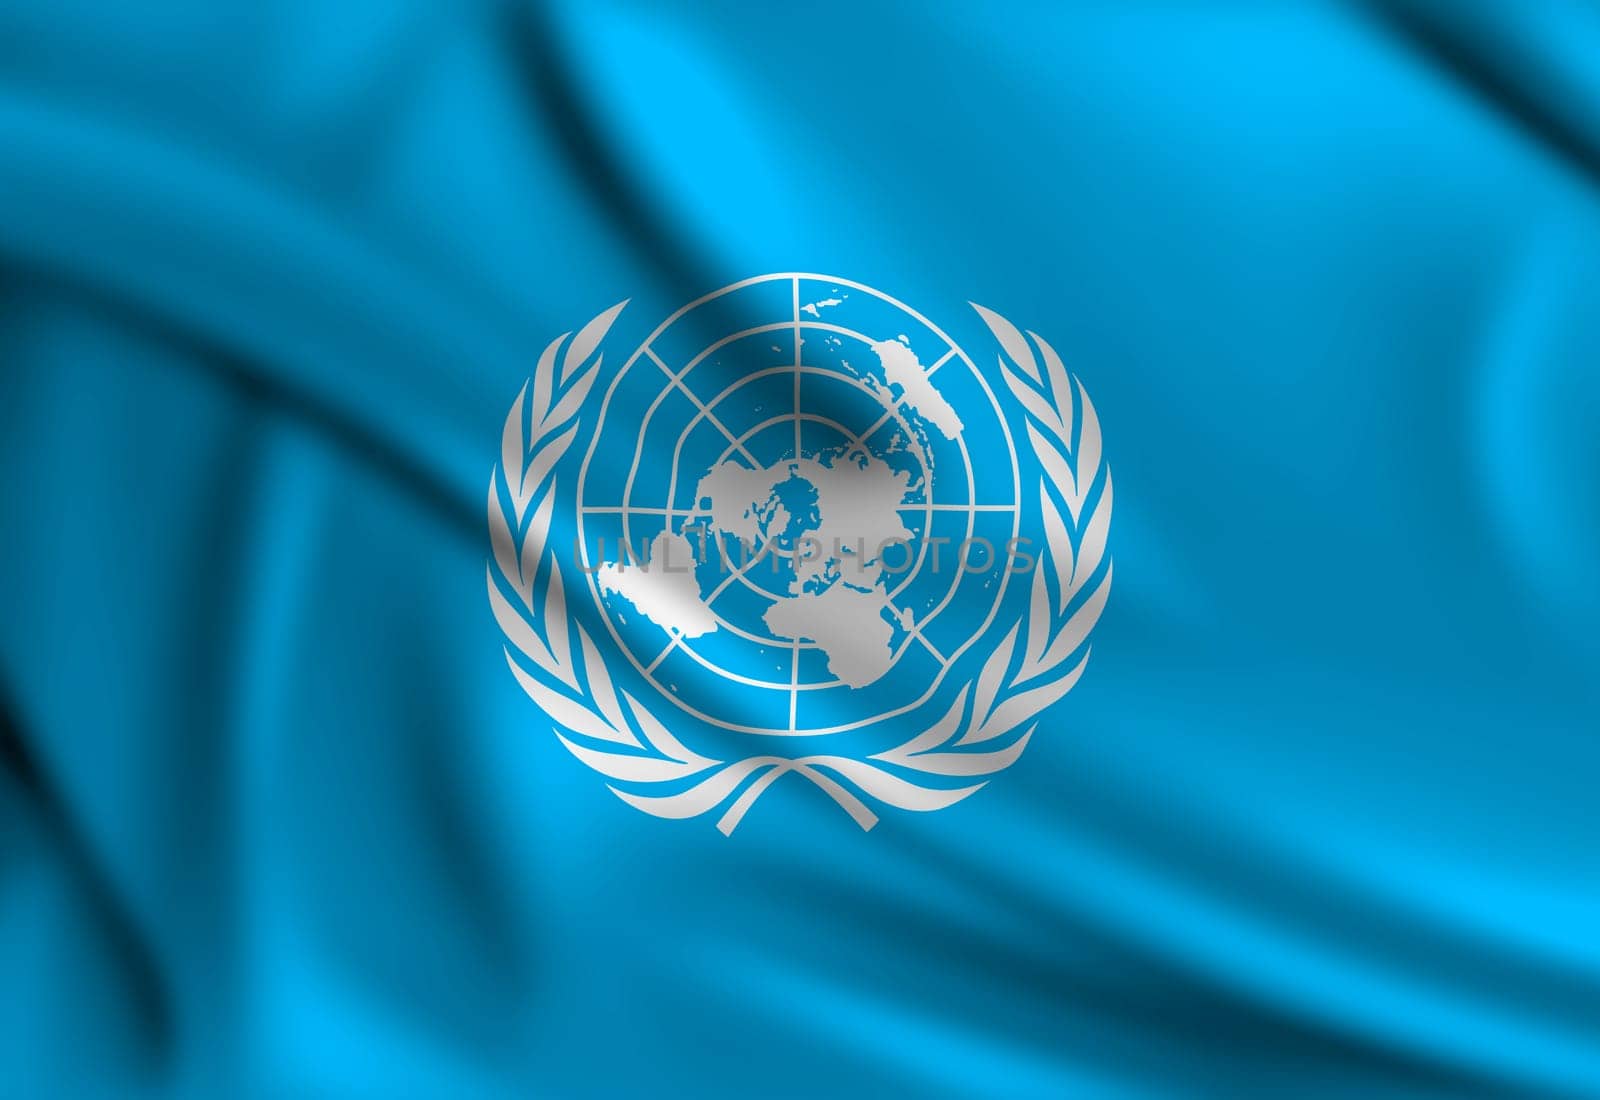 United Nations flag covering the frame is waving in the wind by Sonat